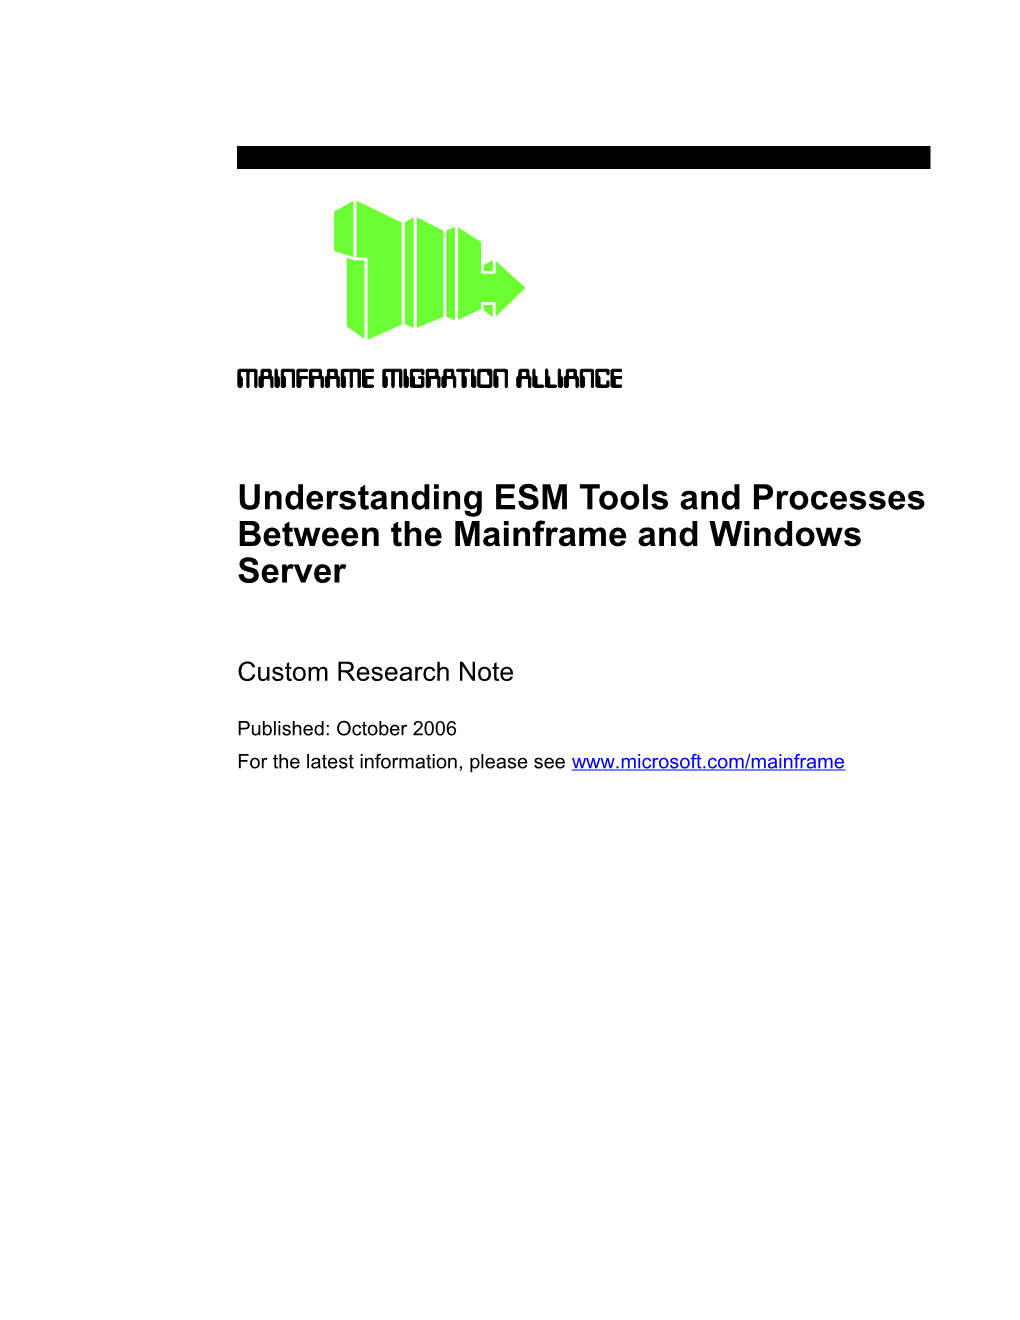 Nderstanding ESM Tools and Processes Between the Mainframe and Windows Server